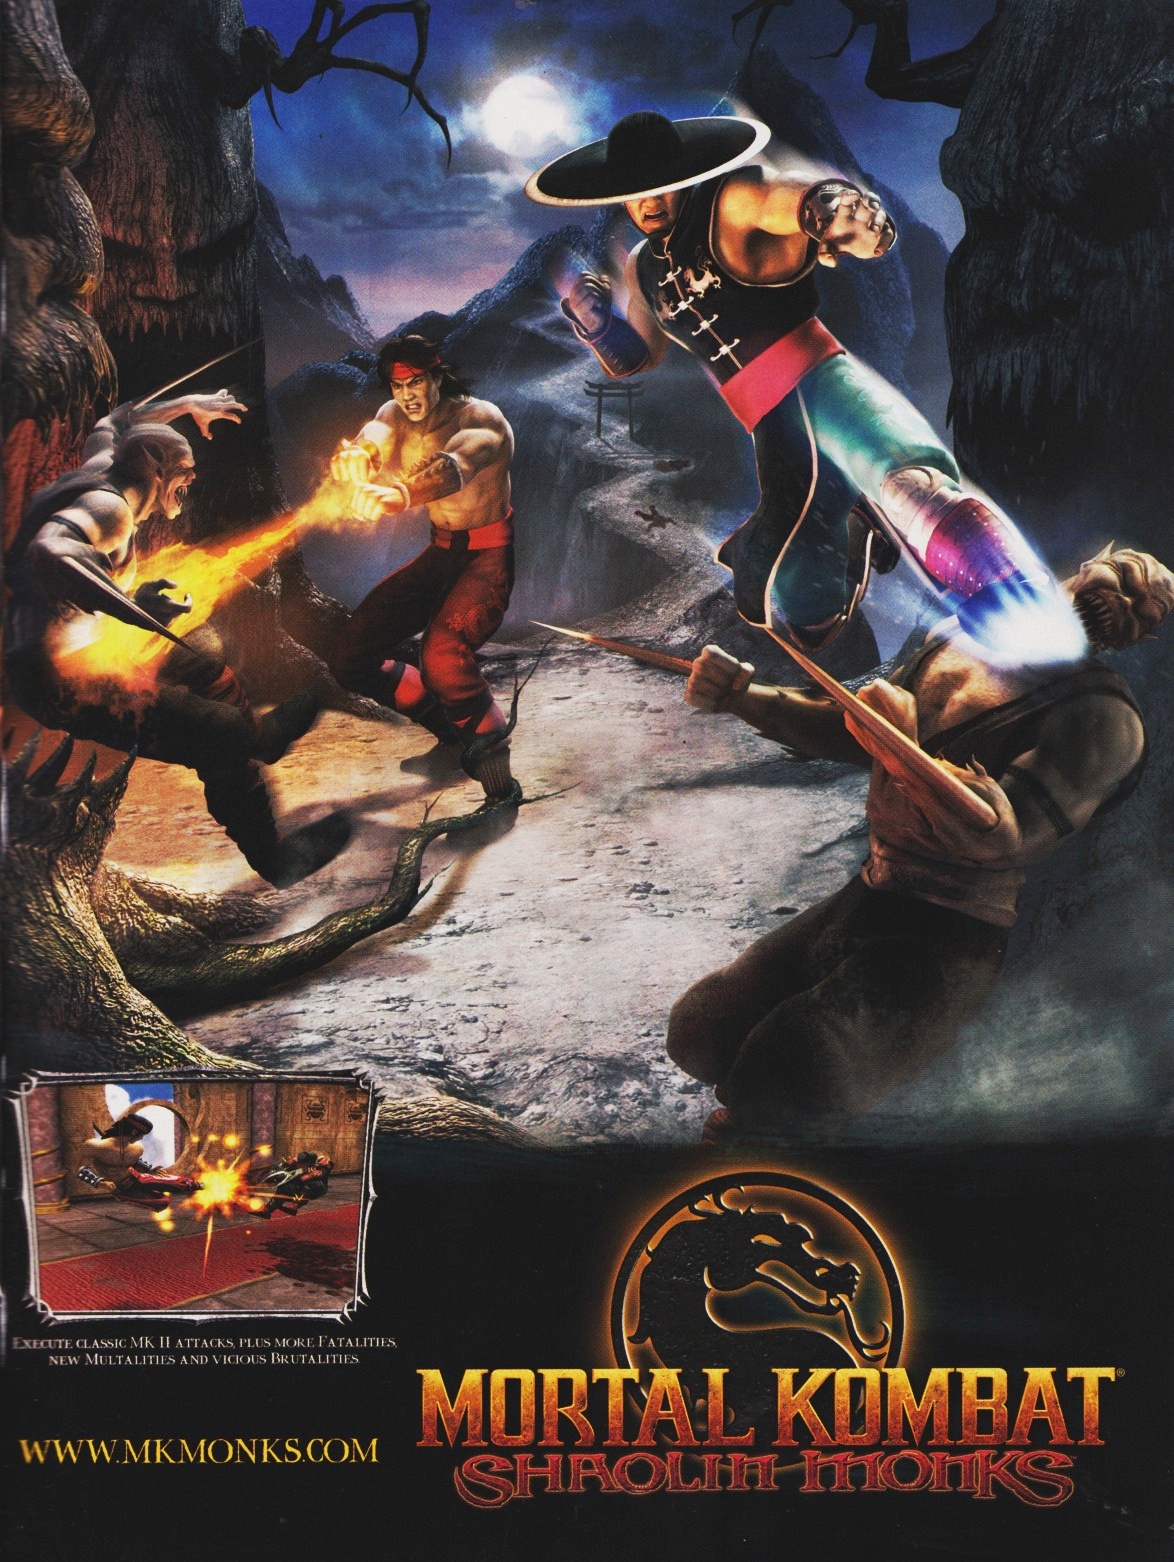 Mortal Kombat - Shaolin Monks [SLUS 21087] (Sony Playstation 2) - Box Scans  (1200DPI) : Midway : Free Download, Borrow, and Streaming : Internet Archive